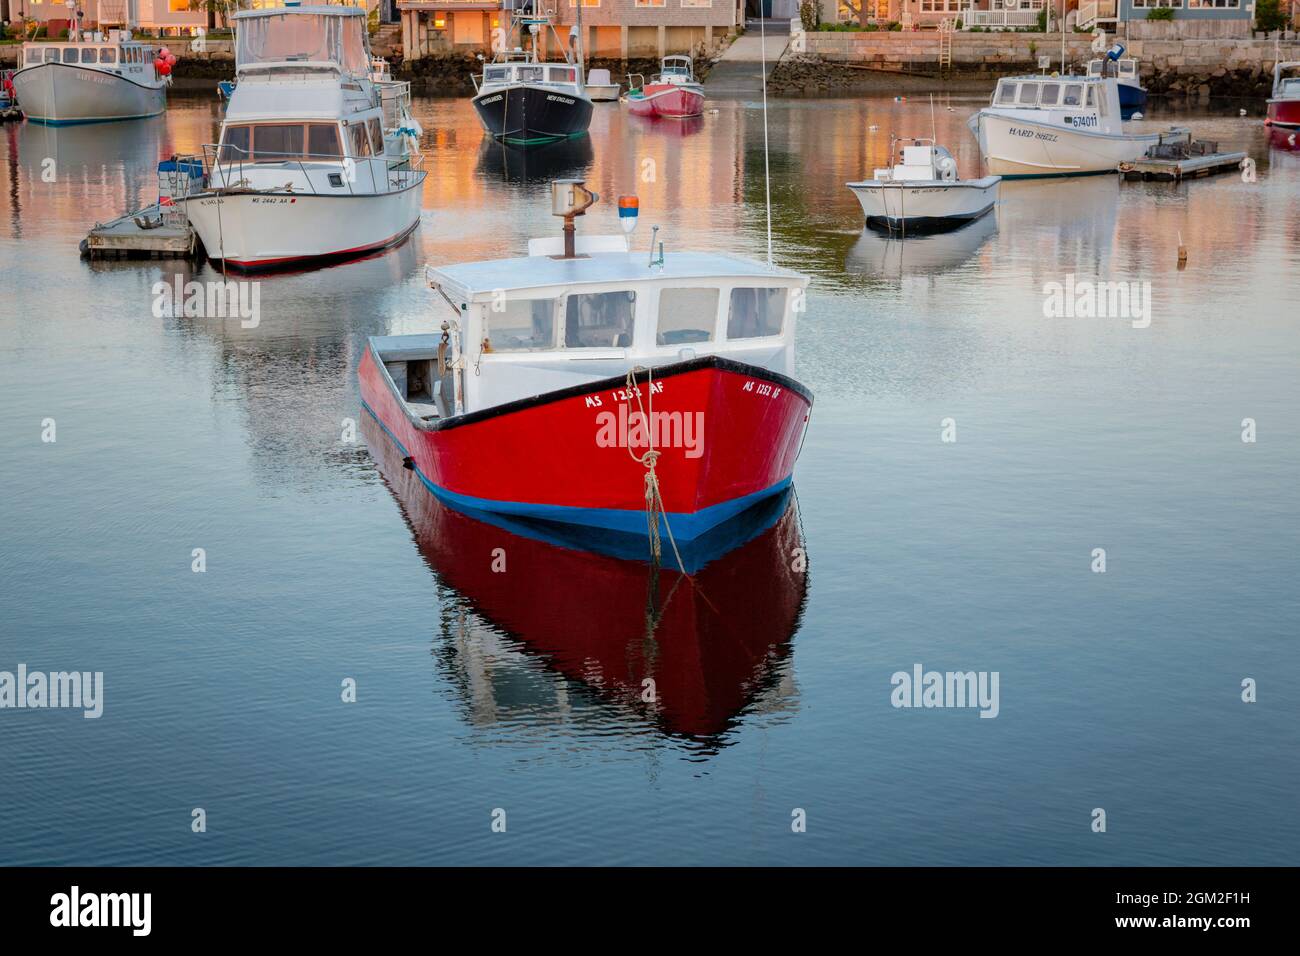 Colorful fishing and pleasure boats docked at Bradley Wharf during sunrise in Rockport, Massachusetts. Stock Photo